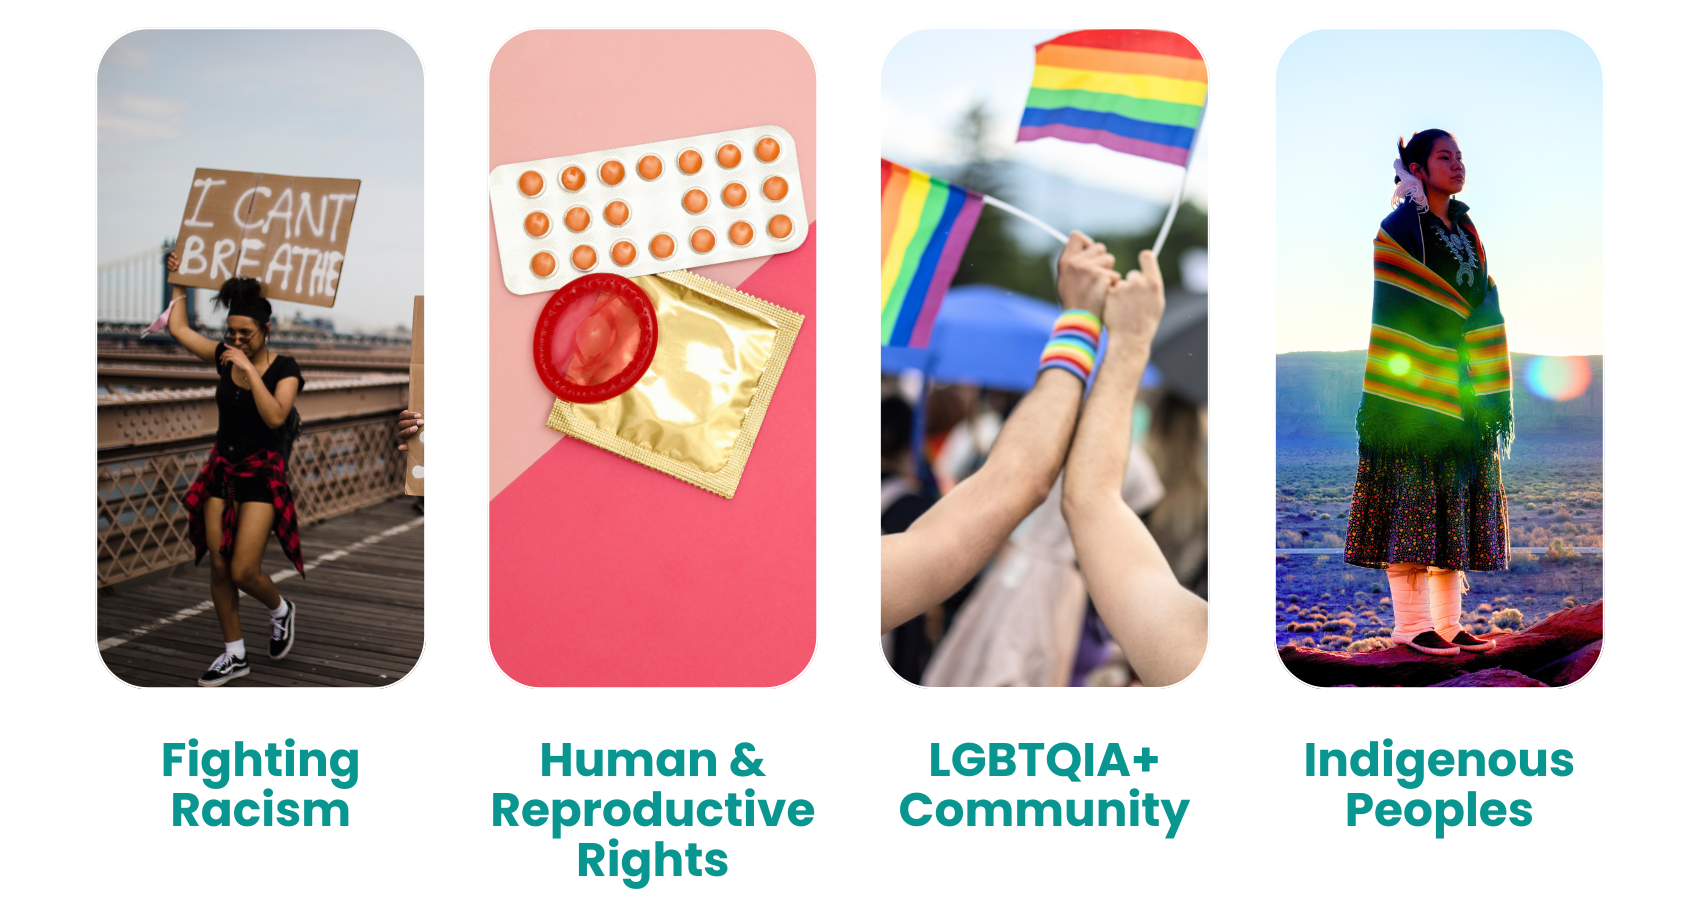 Our giving Tuesday pillars: fighting racism, humana nd reproductive rights, LGBTQIA+ community, and indigenous peoples